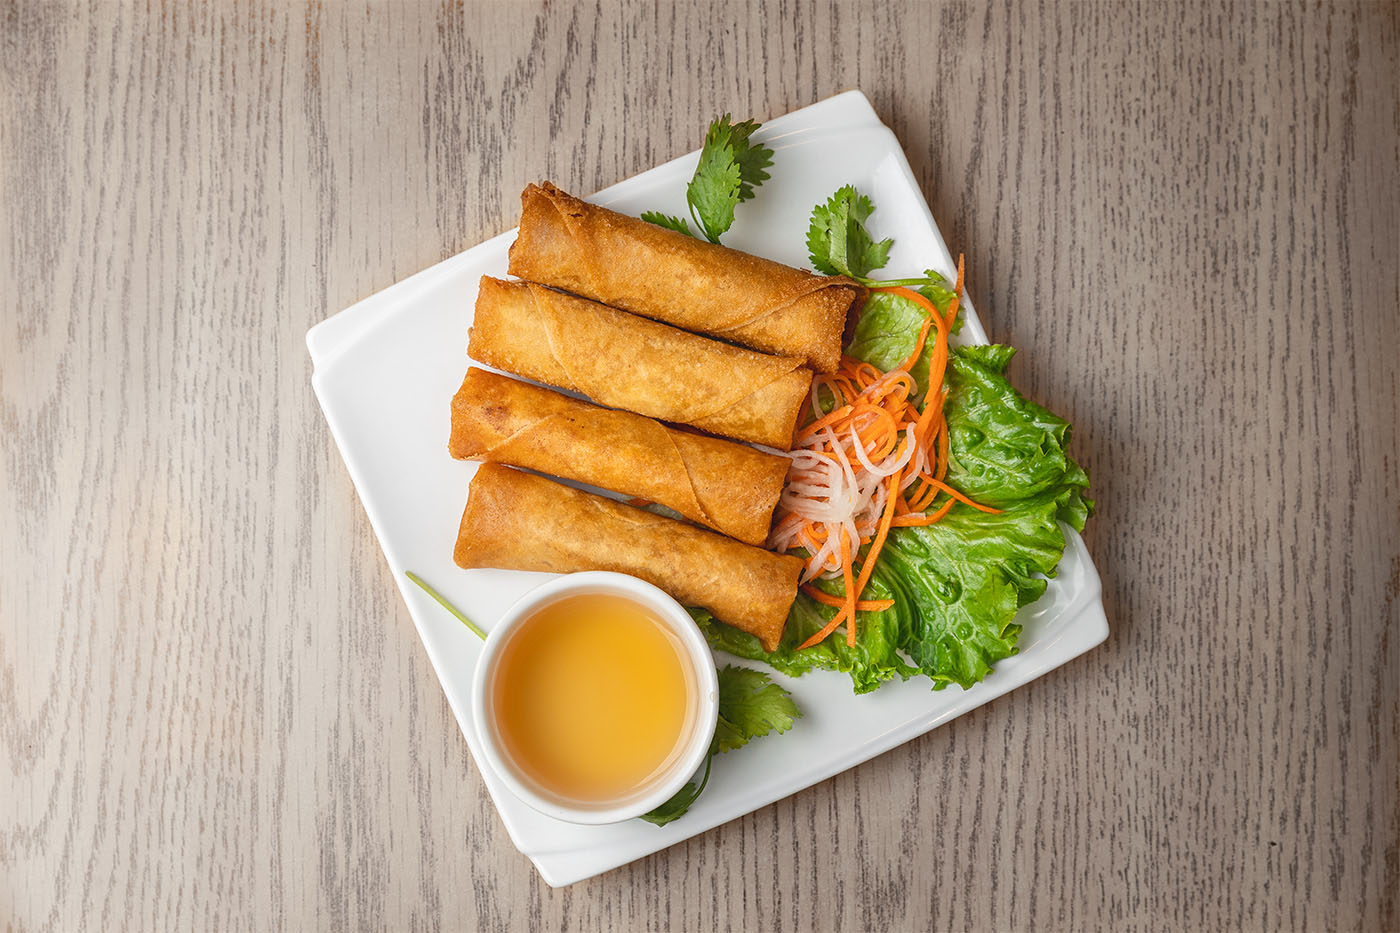 Cha Gio: A guide to the Vietnamese egg rolls